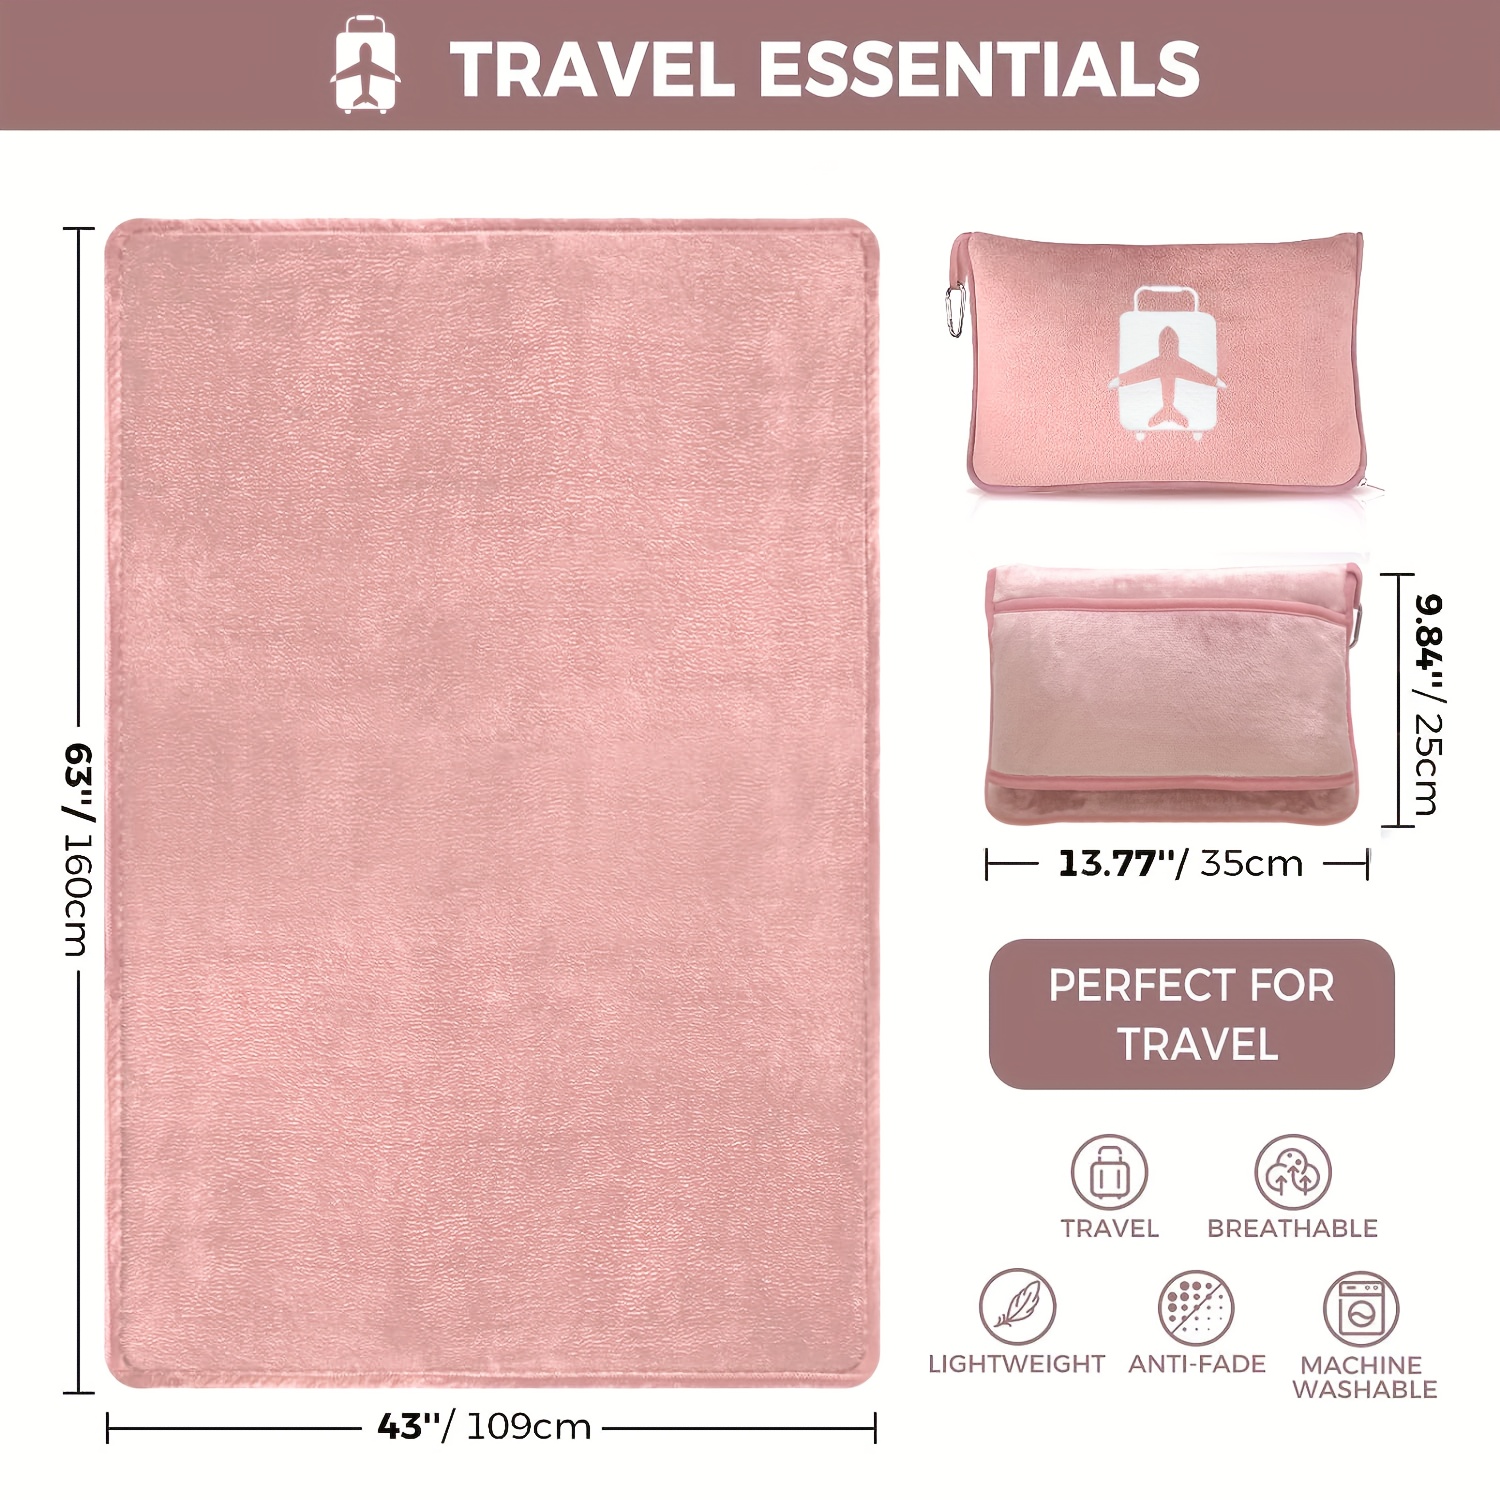  EverSnug Travel Blanket and Pillow - Premium Soft 2 in 1  Airplane Blanket with Soft Bag Pillowcase, Hand Luggage Sleeve and Backpack  Clip (Light Pink) : Home & Kitchen